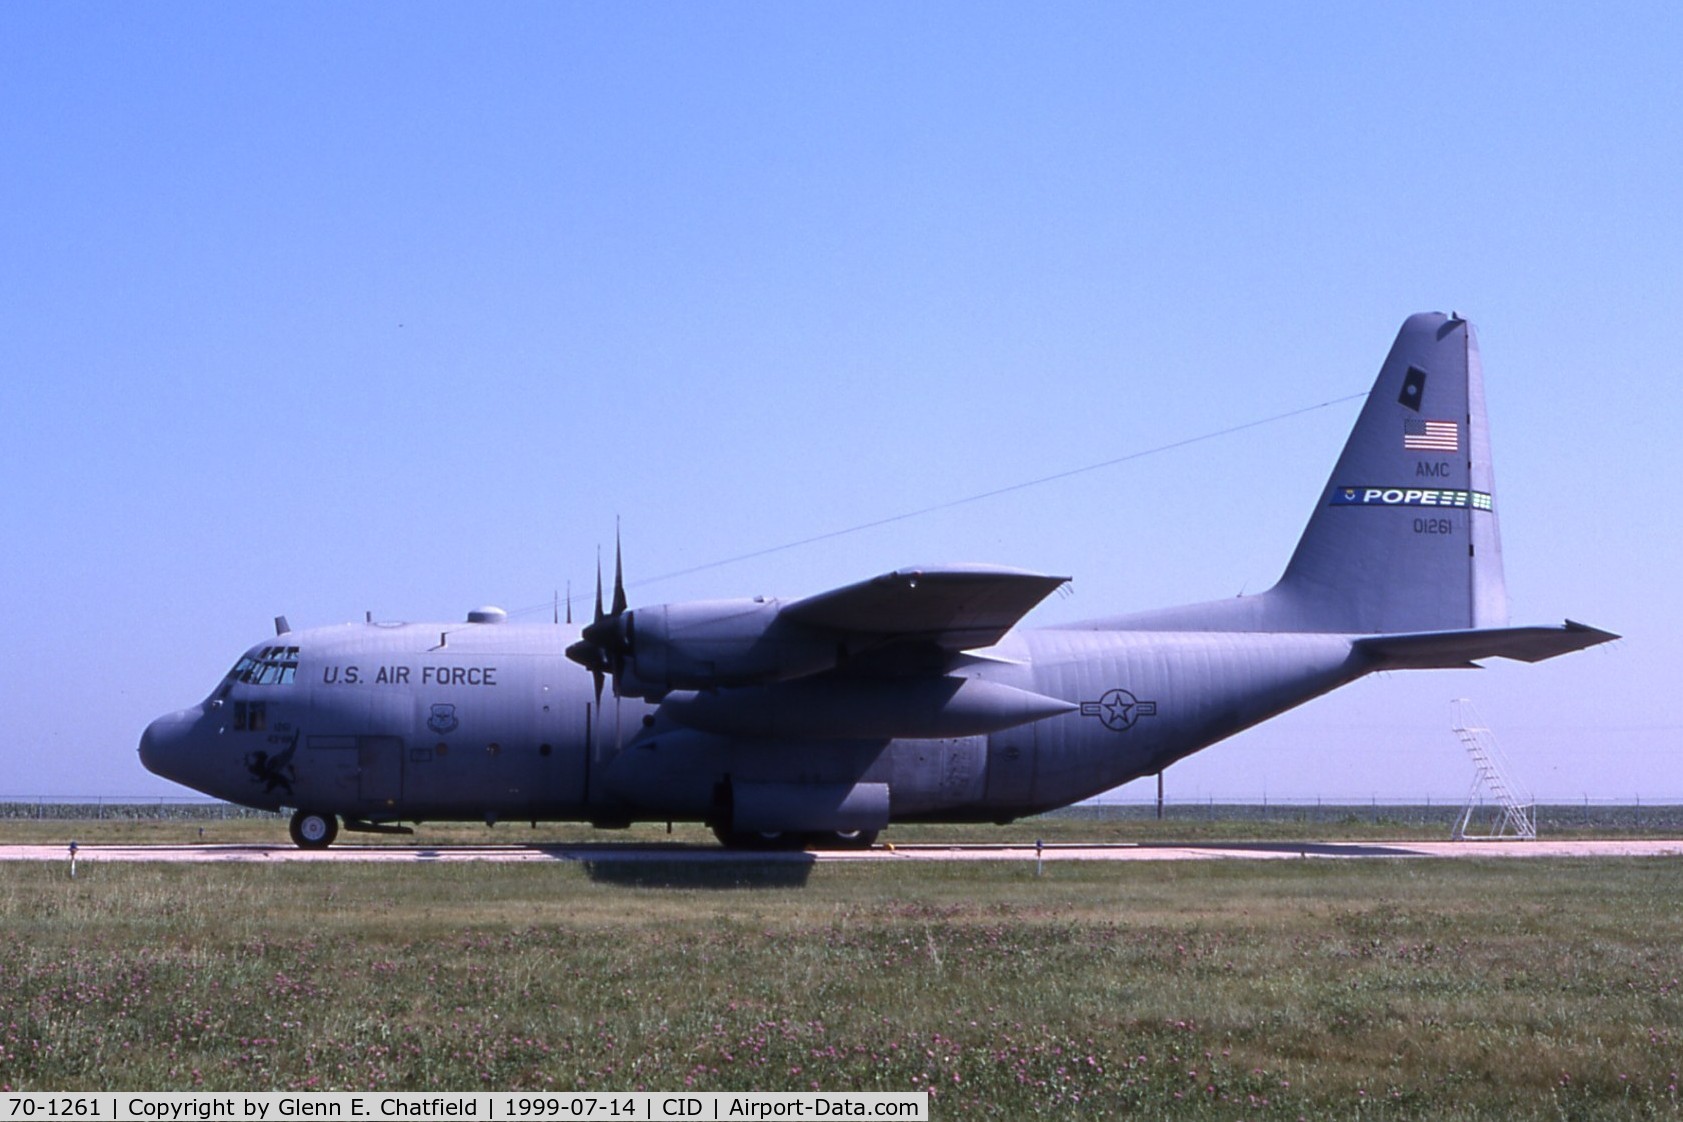 70-1261, 1970 Lockheed C-130E-LM Hercules C/N 382-4413, C-130E in town for presidential support